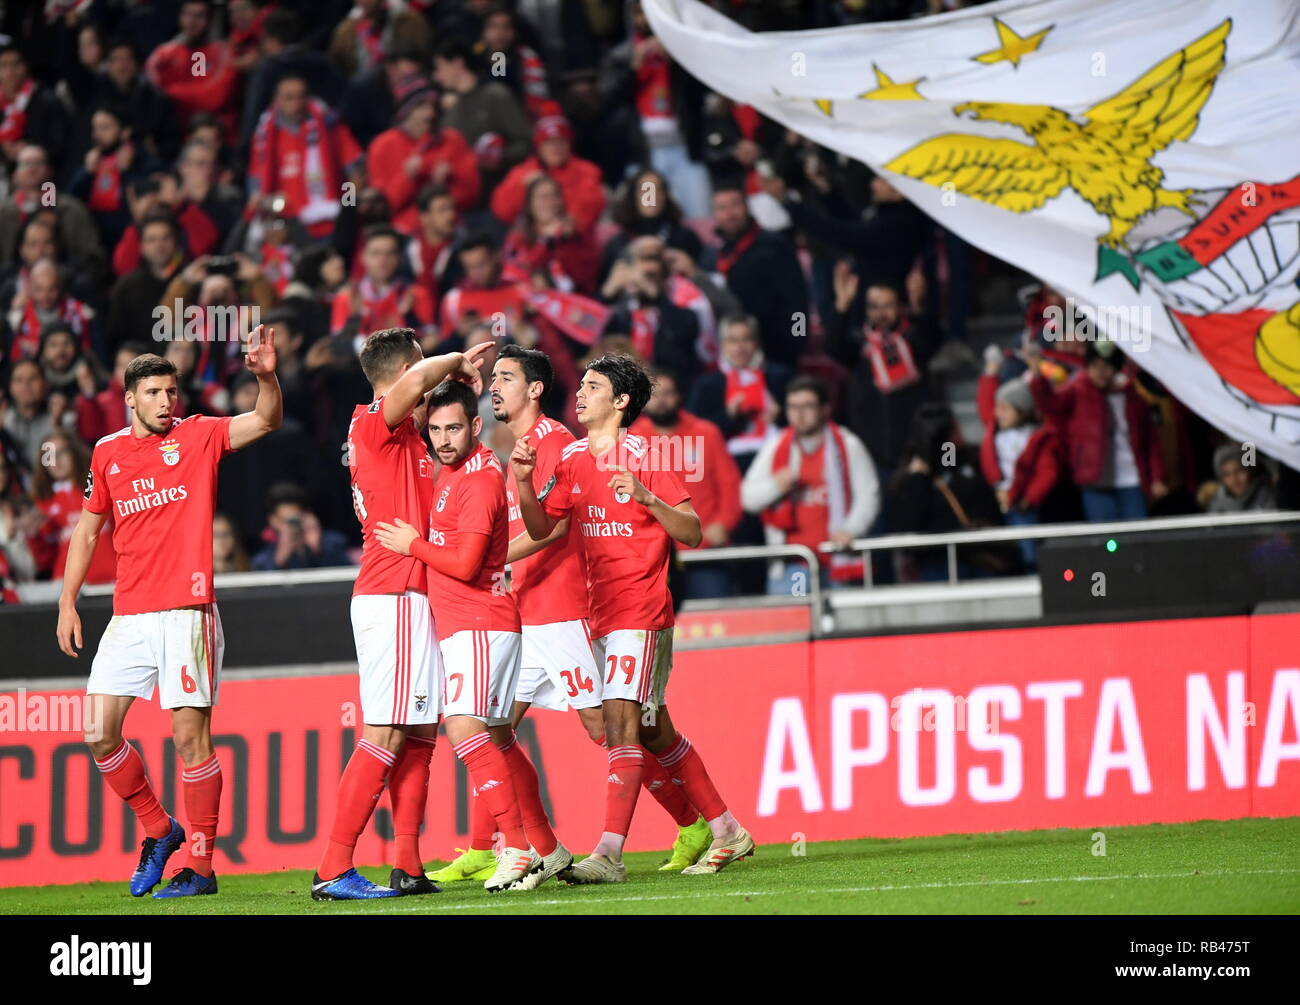 Lisbon, Portugal. 6th Jan, 2019. Joao Felix (1st R) celebrates with his teammates after his scoring during the Portuguese League soccer match between Benfica and Rio Ave in Lisbon, Portugal, Jan. 6, 2019. Benfica won 4-2. Credit: Zhang Liyun/Xinhua/Alamy Live News Stock Photo